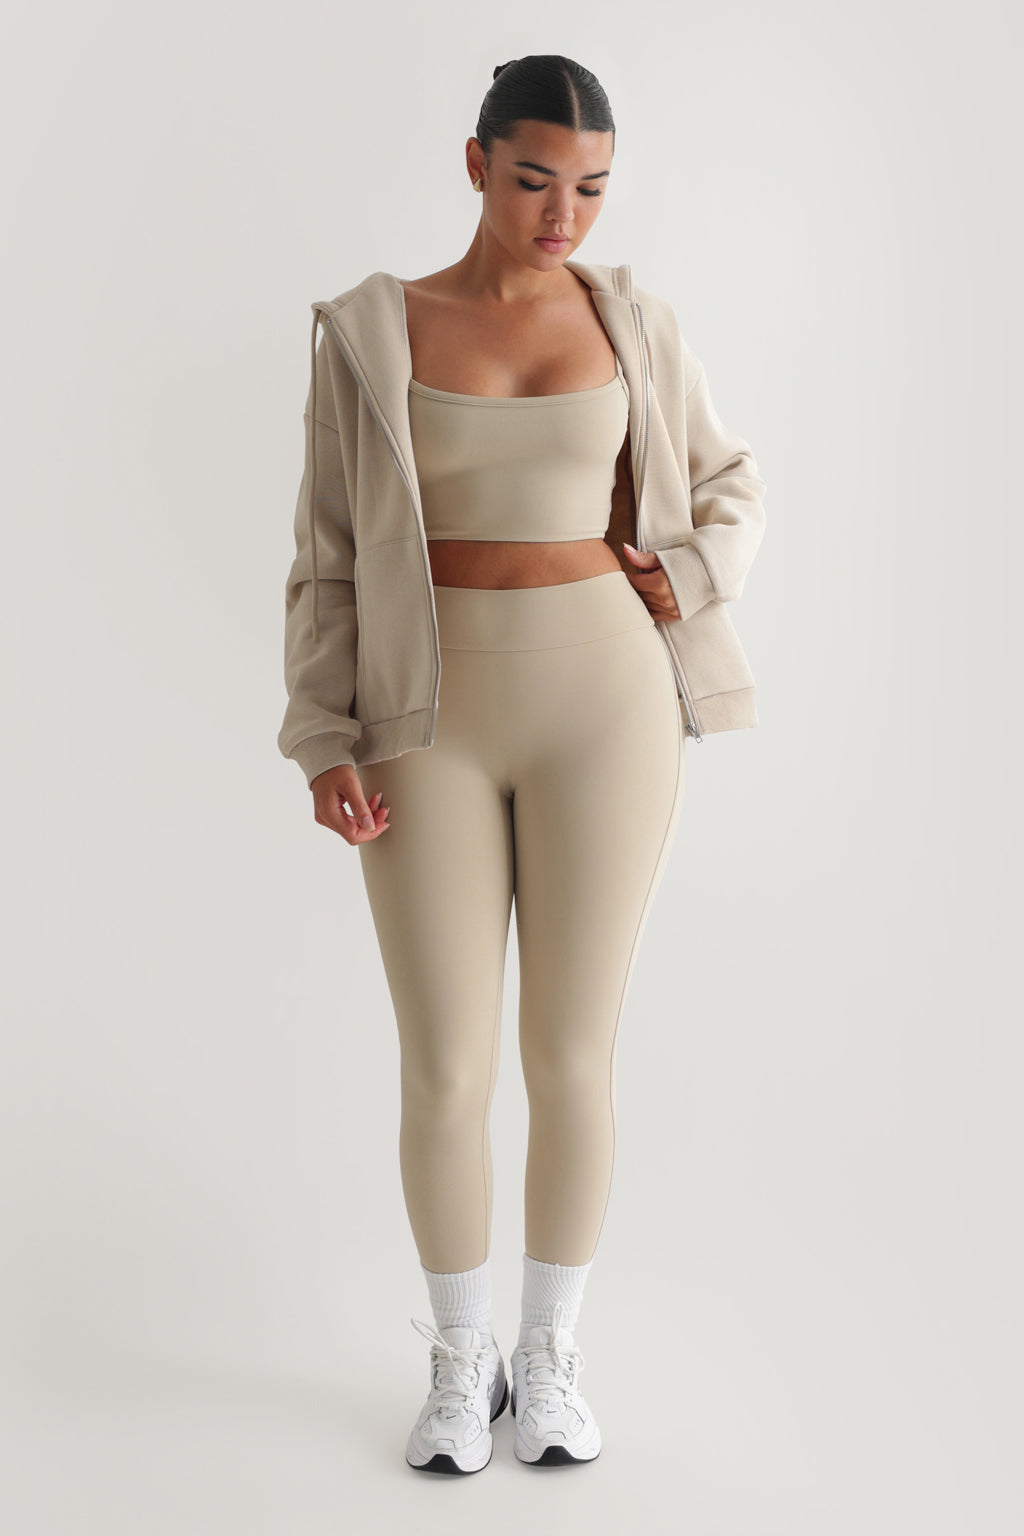 High Waisted Athleisure Leggings - Beige – My Outfit Online